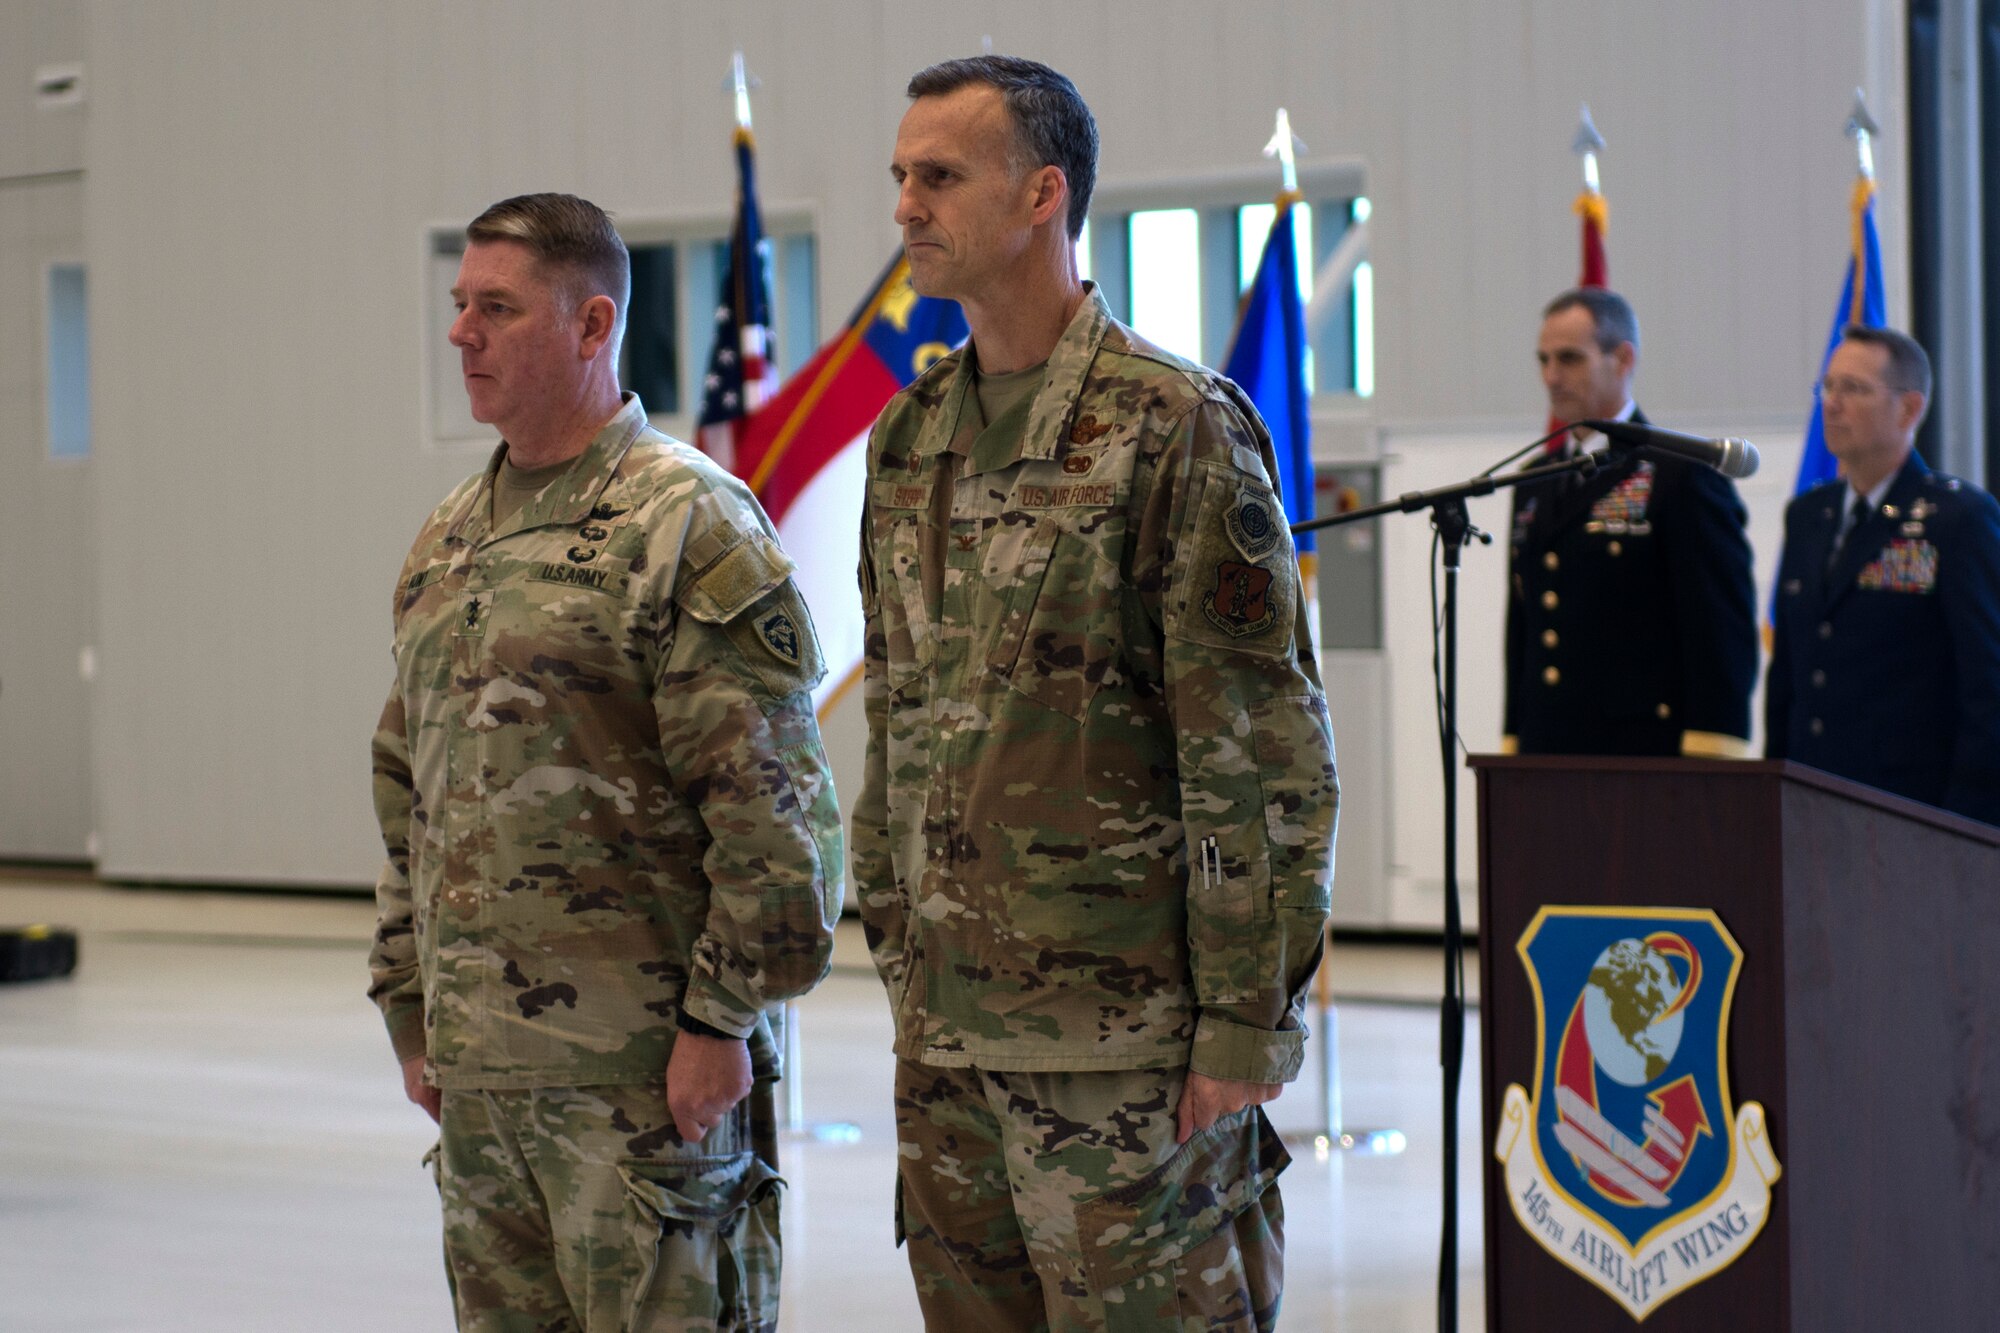 The adjutant general of the North Carolina Guard, Maj. Gen. M. Todd Hunt, and the 145th Airlift Wing Commander Col. Joseph H. Stepp IV anticipate the presentation of the Meritorious Unit award at a ribbon-cutting ceremony at the North Carolina Air National Guard Base.